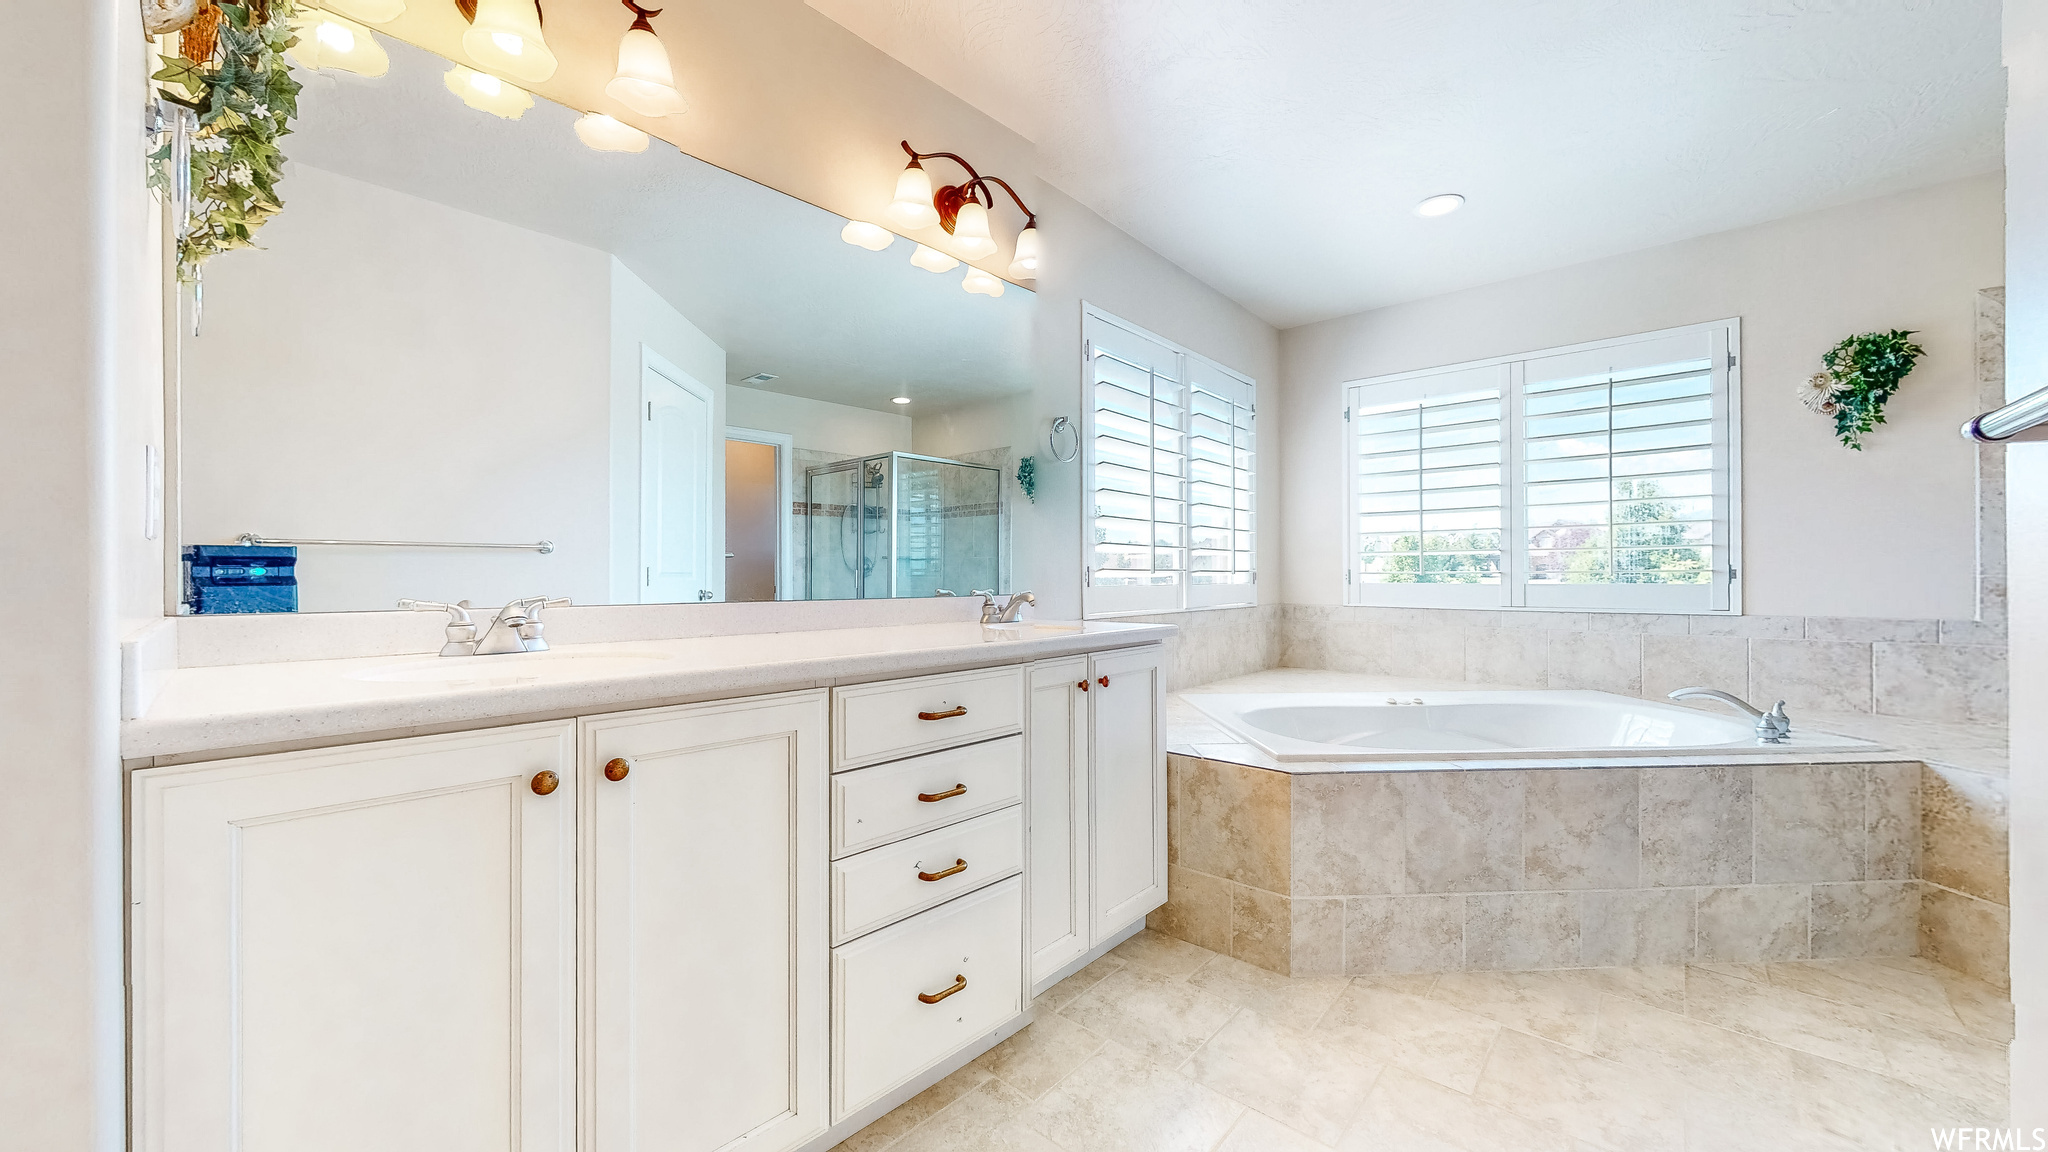 Primary bathroom with vanity with extensive cabinet space, independent shower and bath, tile flooring, and dual sinks